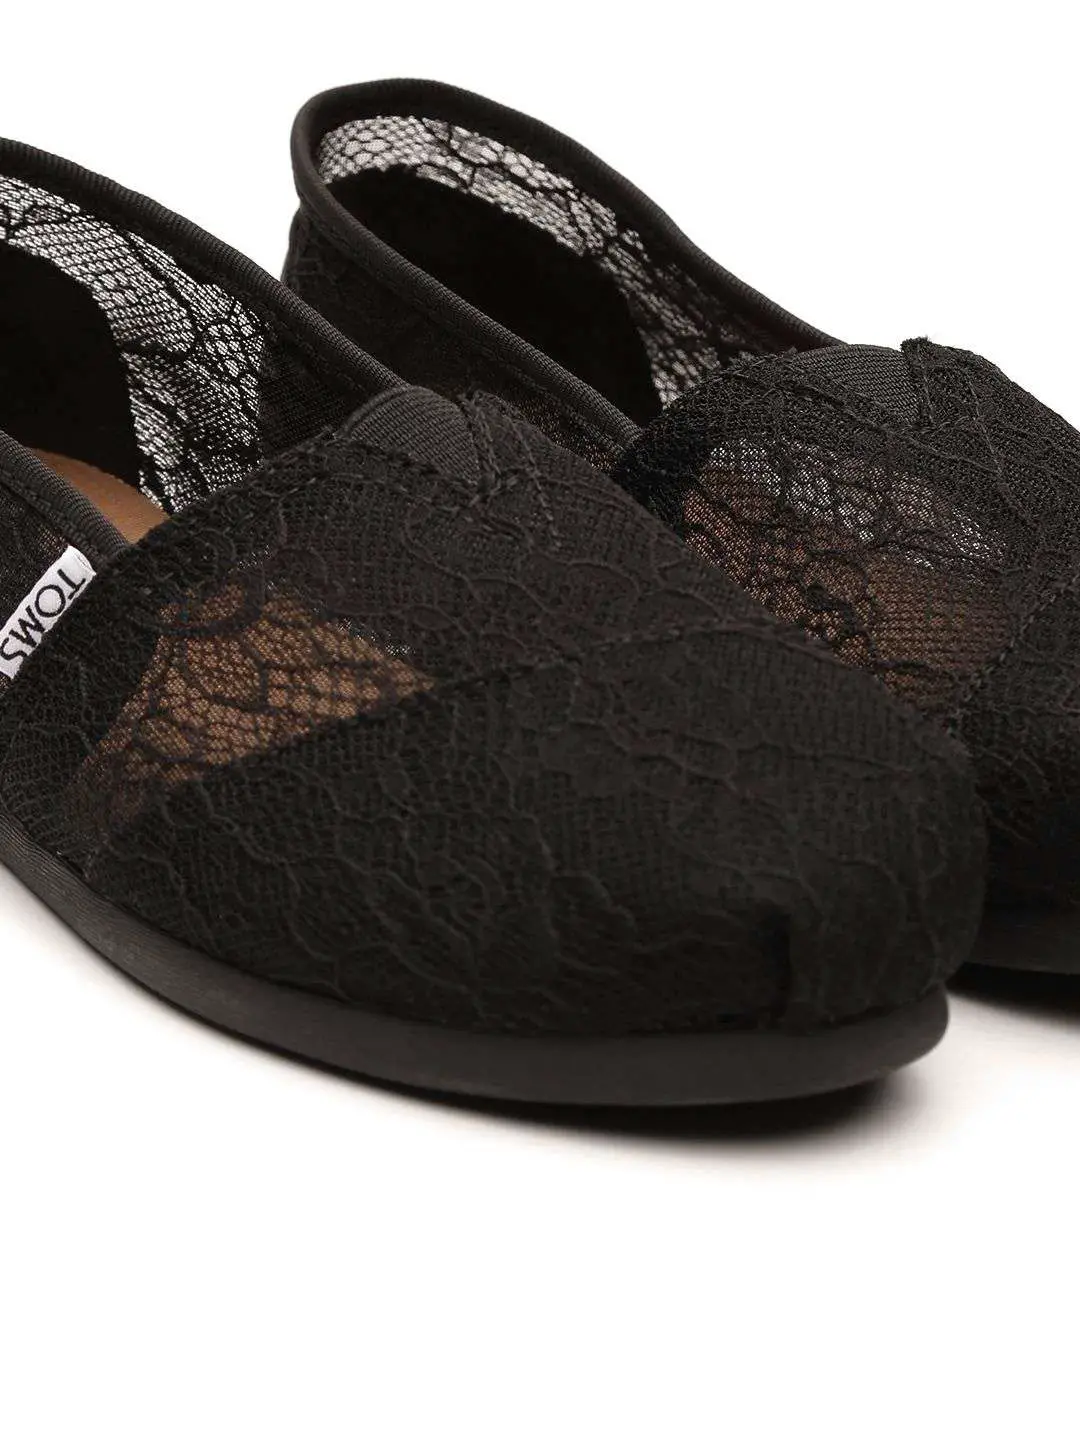 Toms Black Casual Shoes Price in India